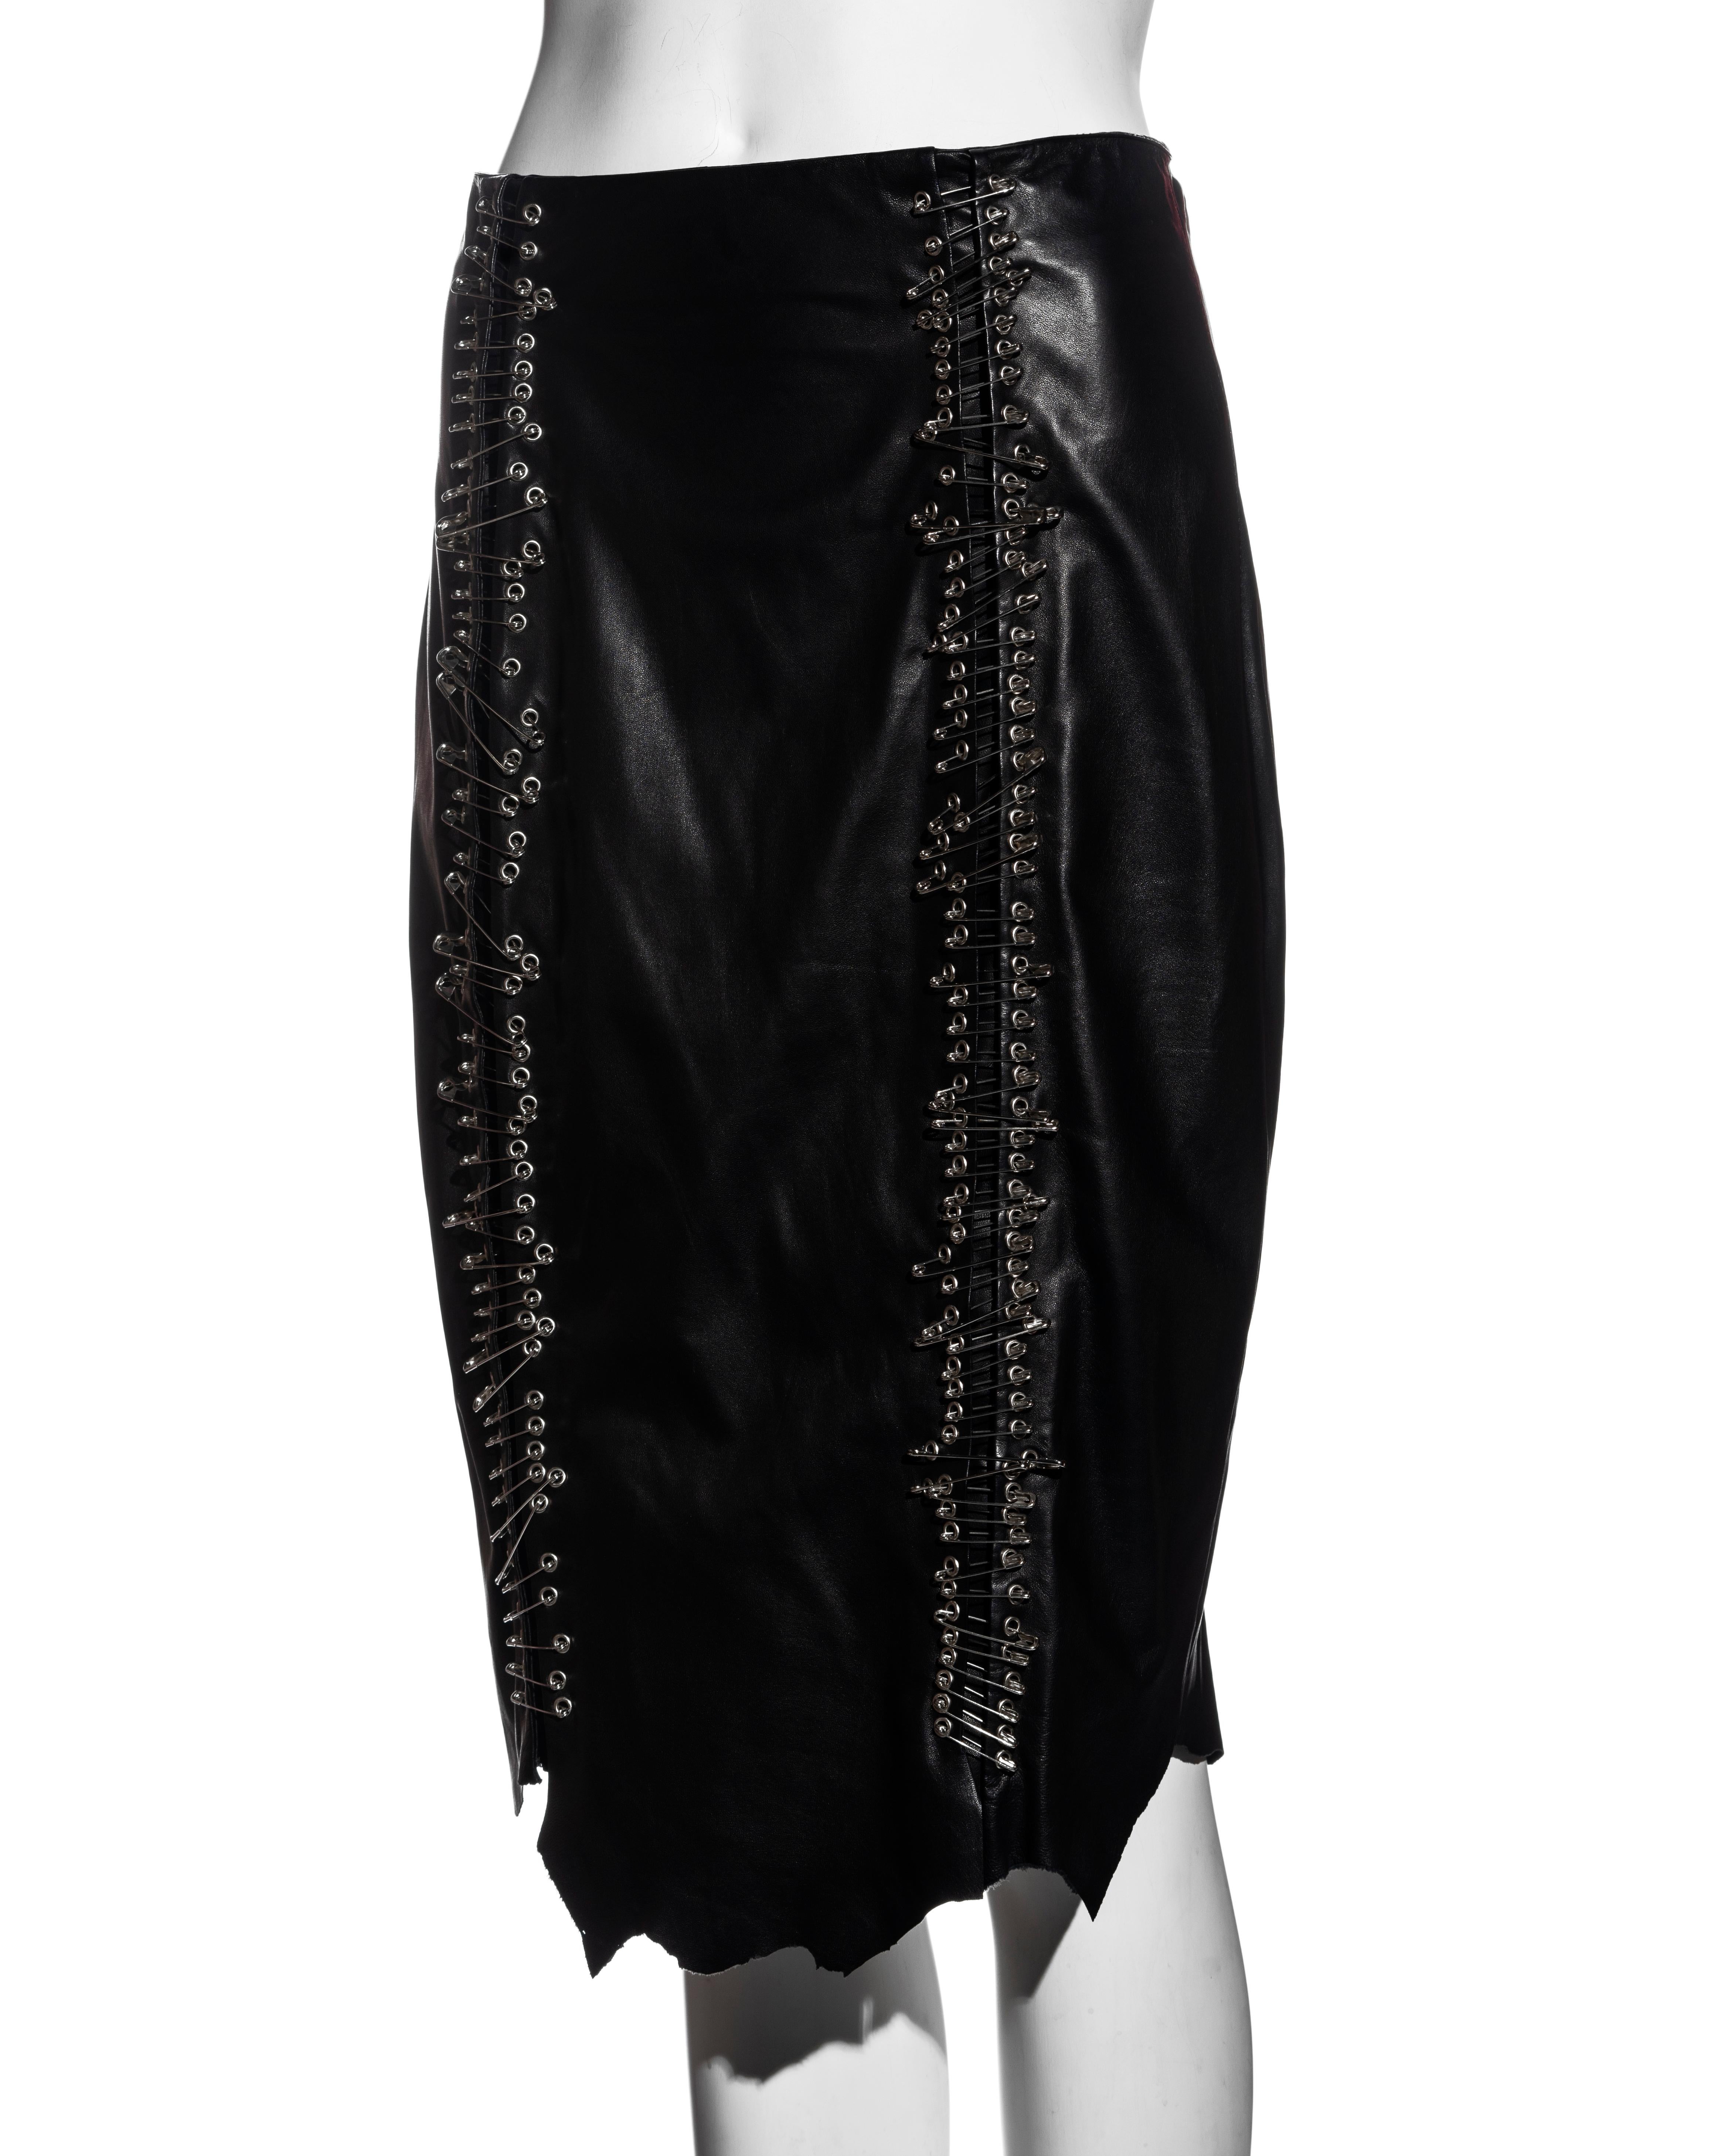 Women's Balmain by Christophe Decarnin black leather safety-pin skirt, ss 2011 For Sale